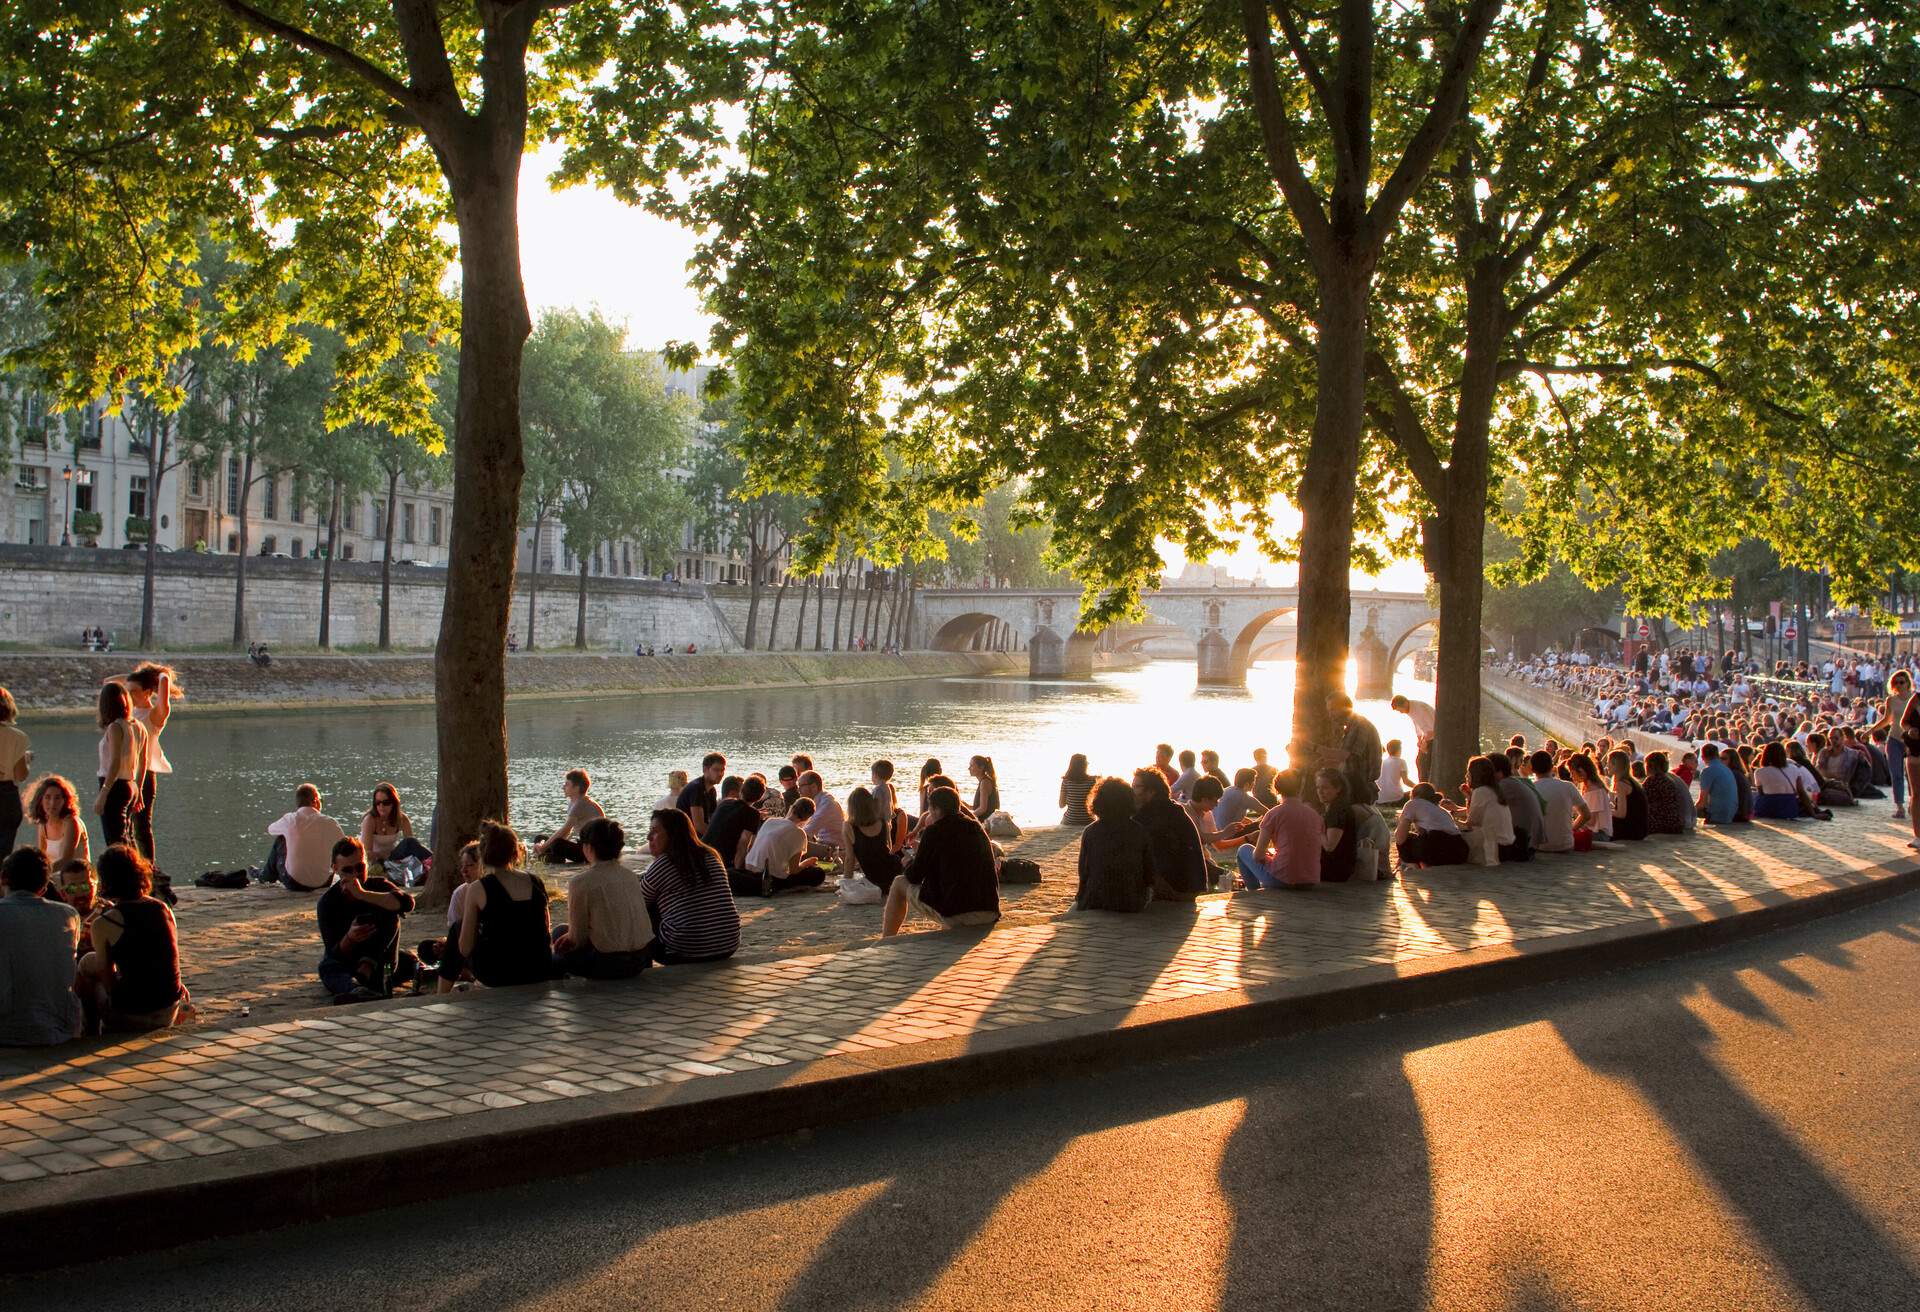 People sitting under the shade of trees along the banks of a river.